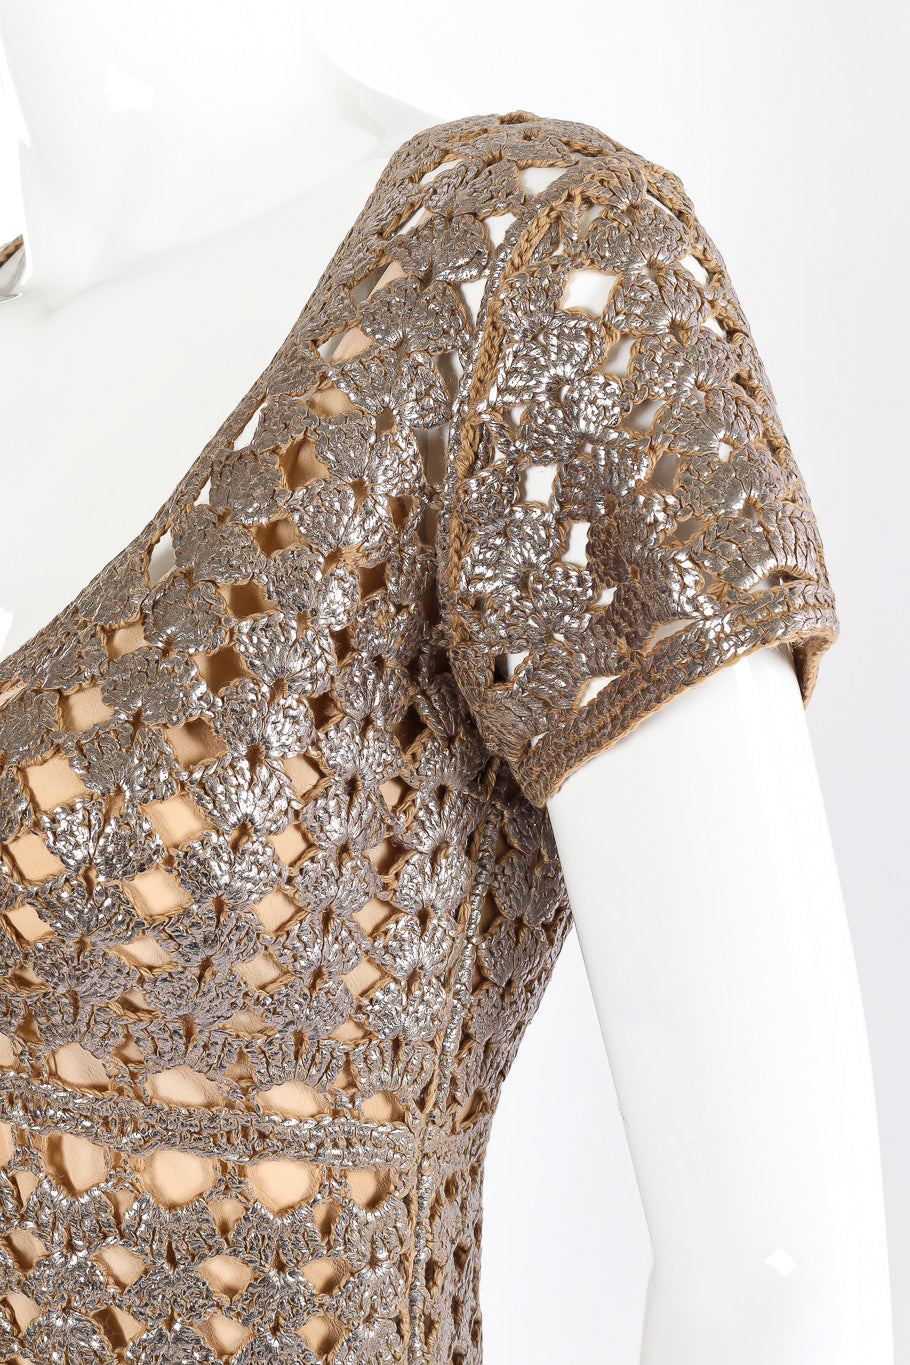 Metallic crochet knitted cocktail dress by Prada Photo Close-up on mannequin. @recessla